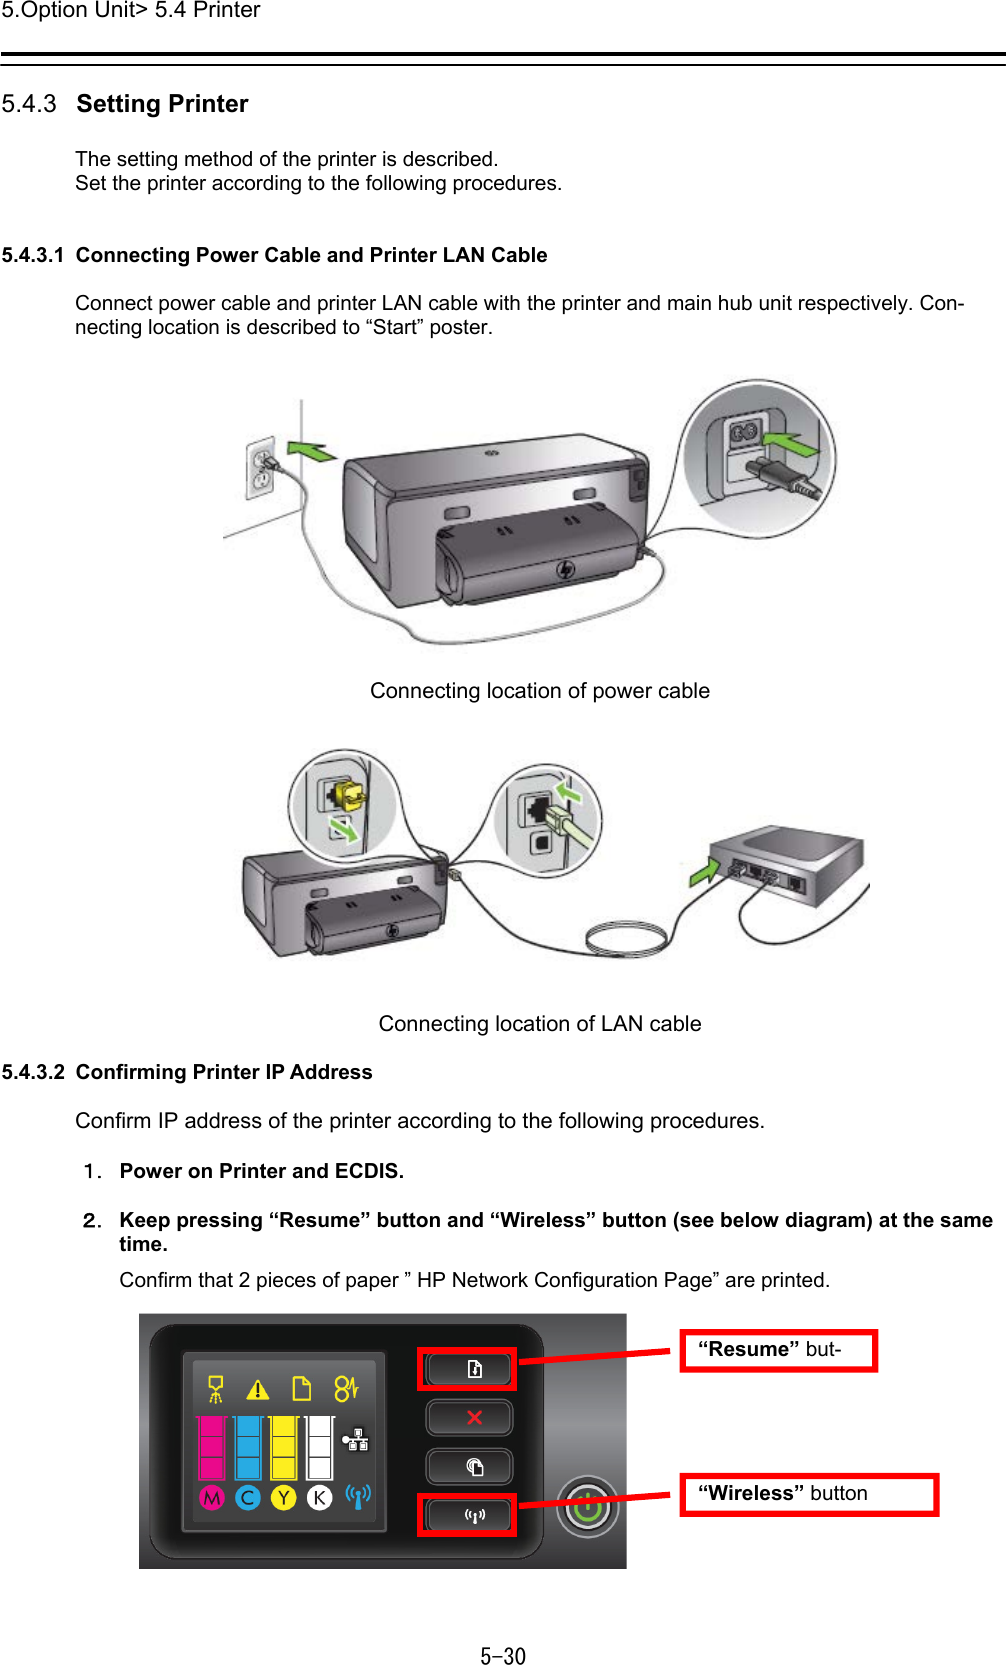 5.Option Unit&gt; 5.4 Printer 5-30  5.4.3   Setting Printer  The setting method of the printer is described.   Set the printer according to the following procedures.   5.4.3.1  Connecting Power Cable and Printer LAN Cable  Connect power cable and printer LAN cable with the printer and main hub unit respectively. Con-necting location is described to “Start” poster.    Connecting location of power cable    Connecting location of LAN cable  5.4.3.2  Confirming Printer IP Address  Confirm IP address of the printer according to the following procedures.  １． Power on Printer and ECDIS.  ２． Keep pressing “Resume” button and “Wireless” button (see below diagram) at the same time.  Confirm that 2 pieces of paper ” HP Network Configuration Page” are printed.  “Resume” but-“Wireless” button 